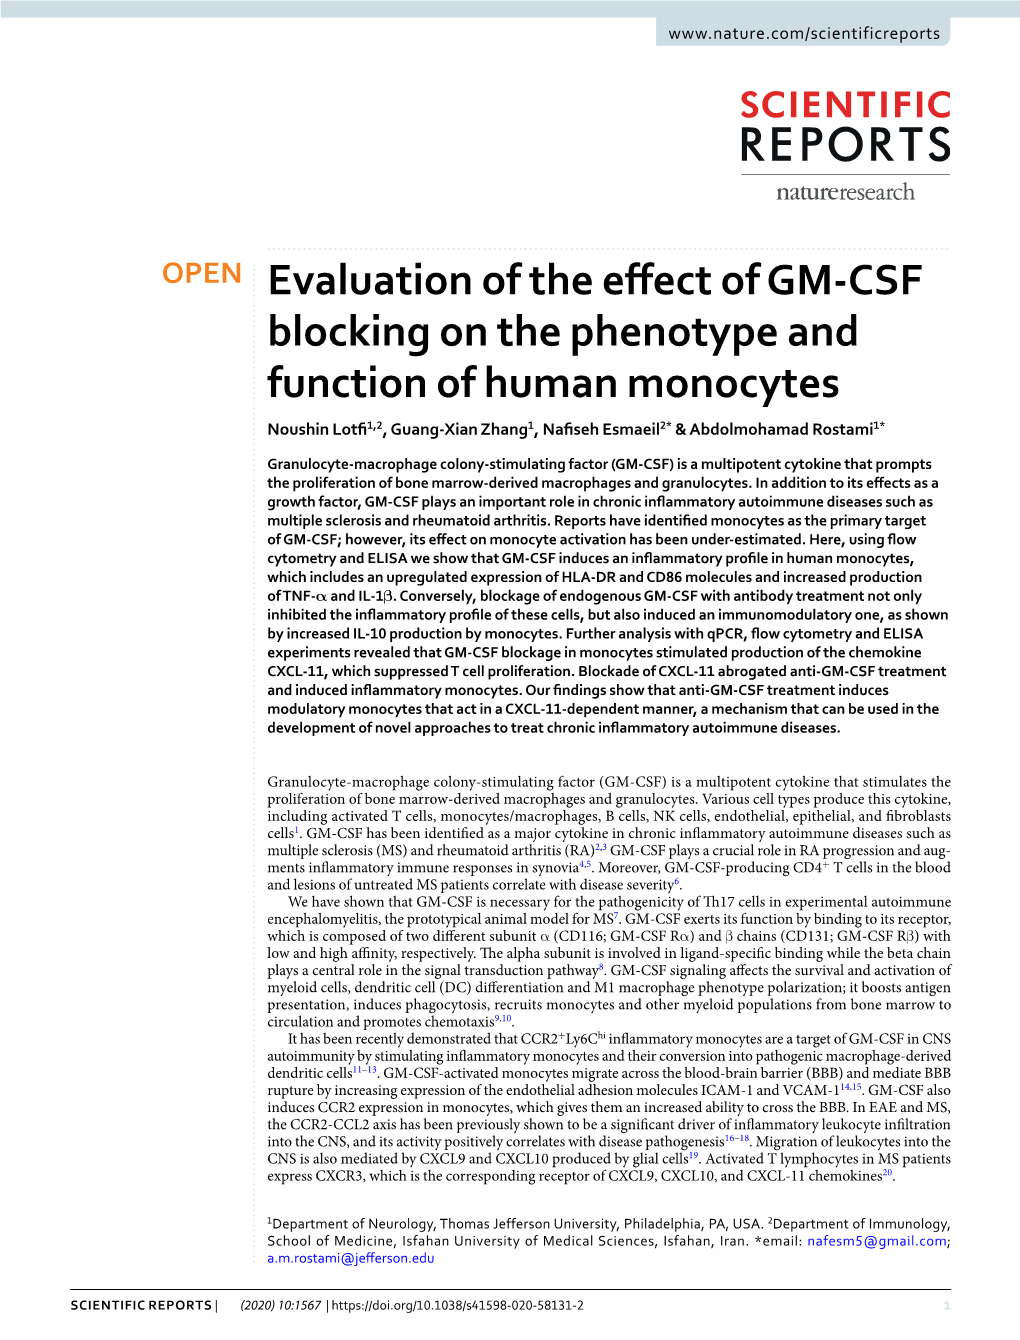 Evaluation of the Effect of GM-CSF Blocking on the Phenotype And